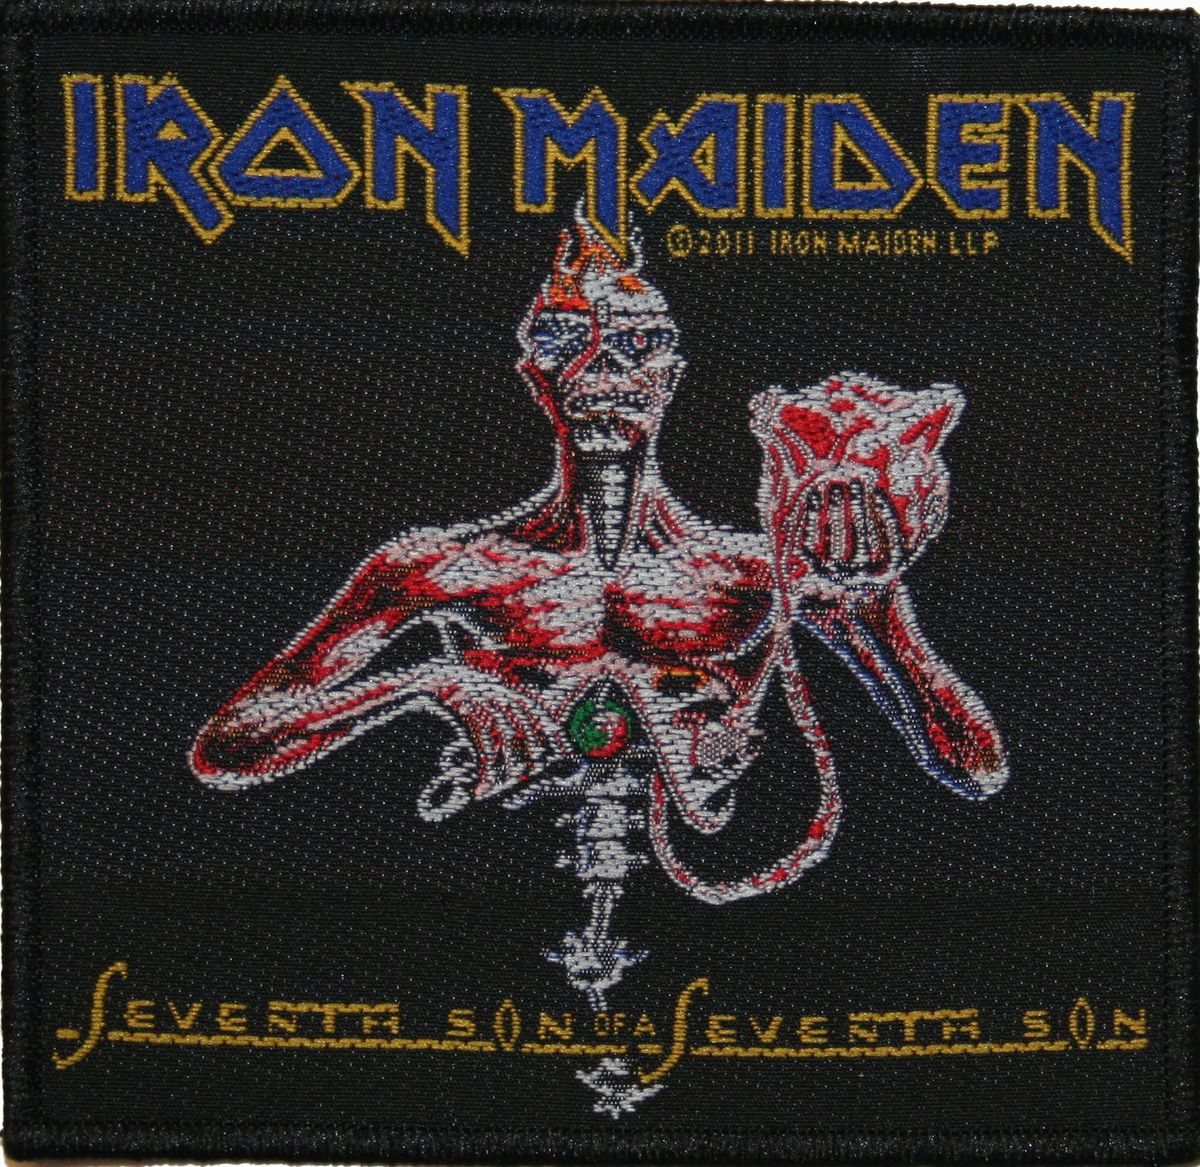 Iron Maiden Seventh Son Heavy Metal Music Woven Patch